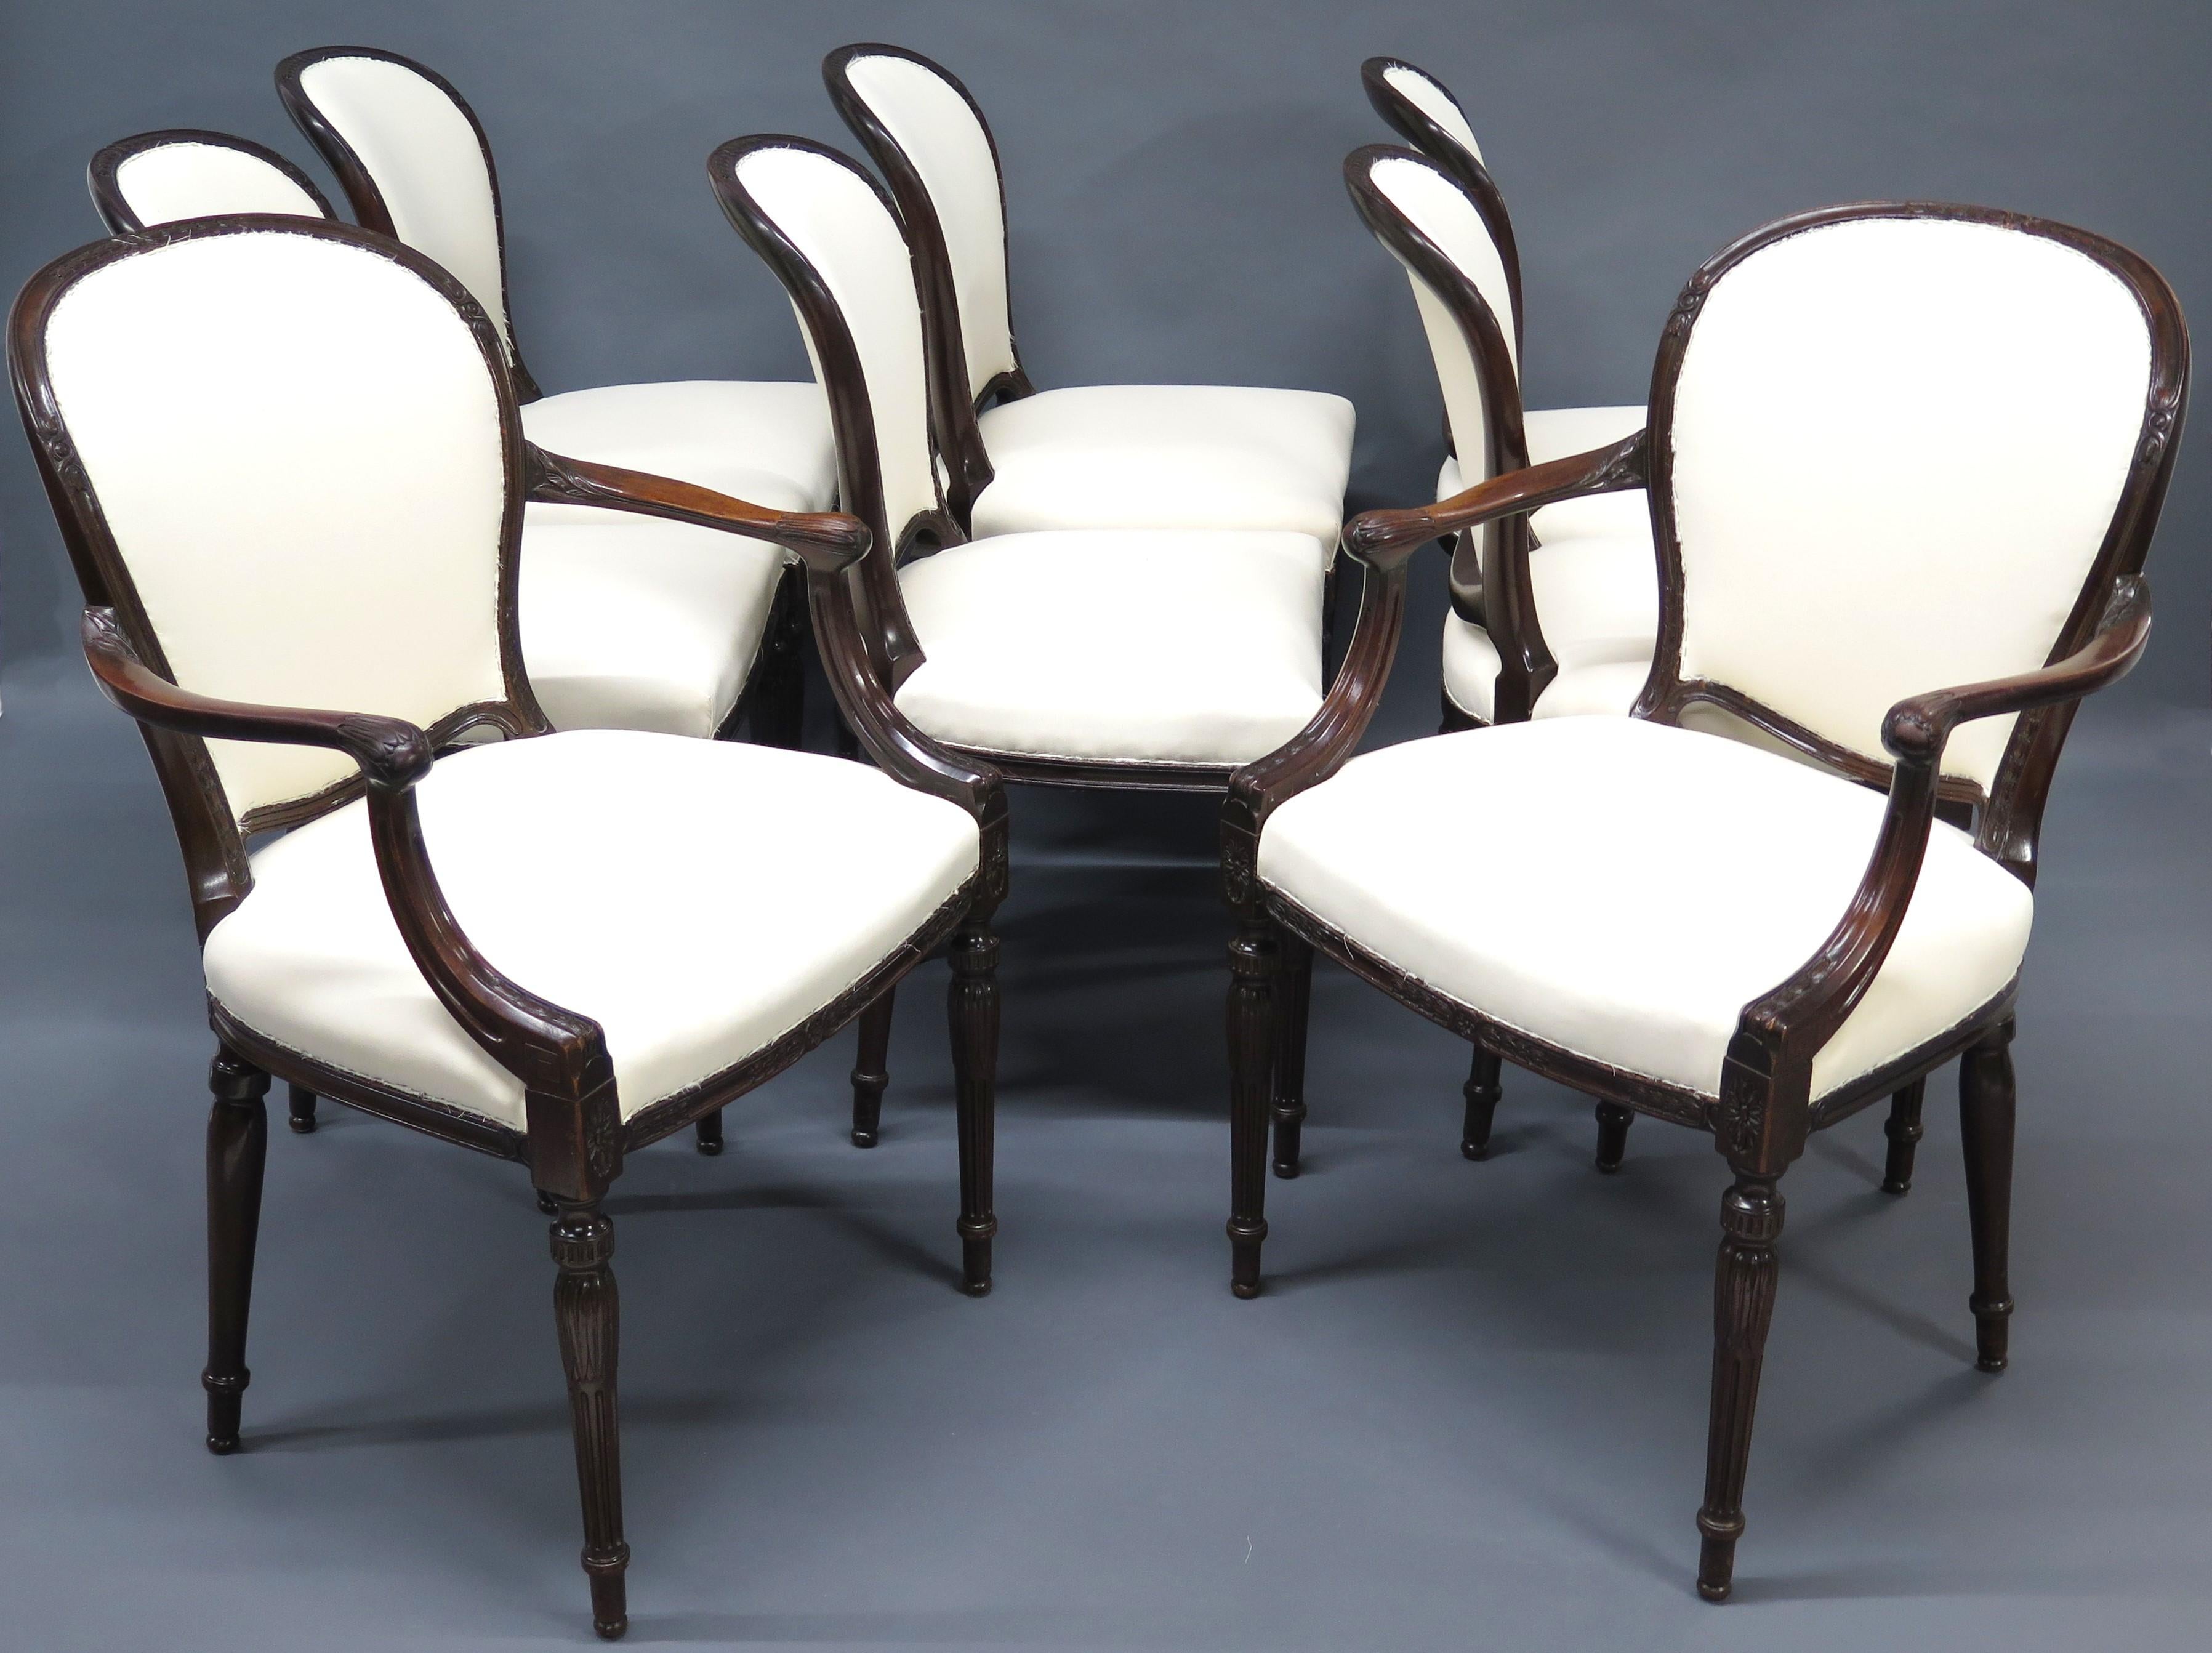 a set of eight (8) George III mahogany dining chairs, 6 side chairs and 2 elbow chairs, upholstered in muslin, ready for show cloth, turned reeded legs. England. circa 1800

MEASUREMENTS:

34.75